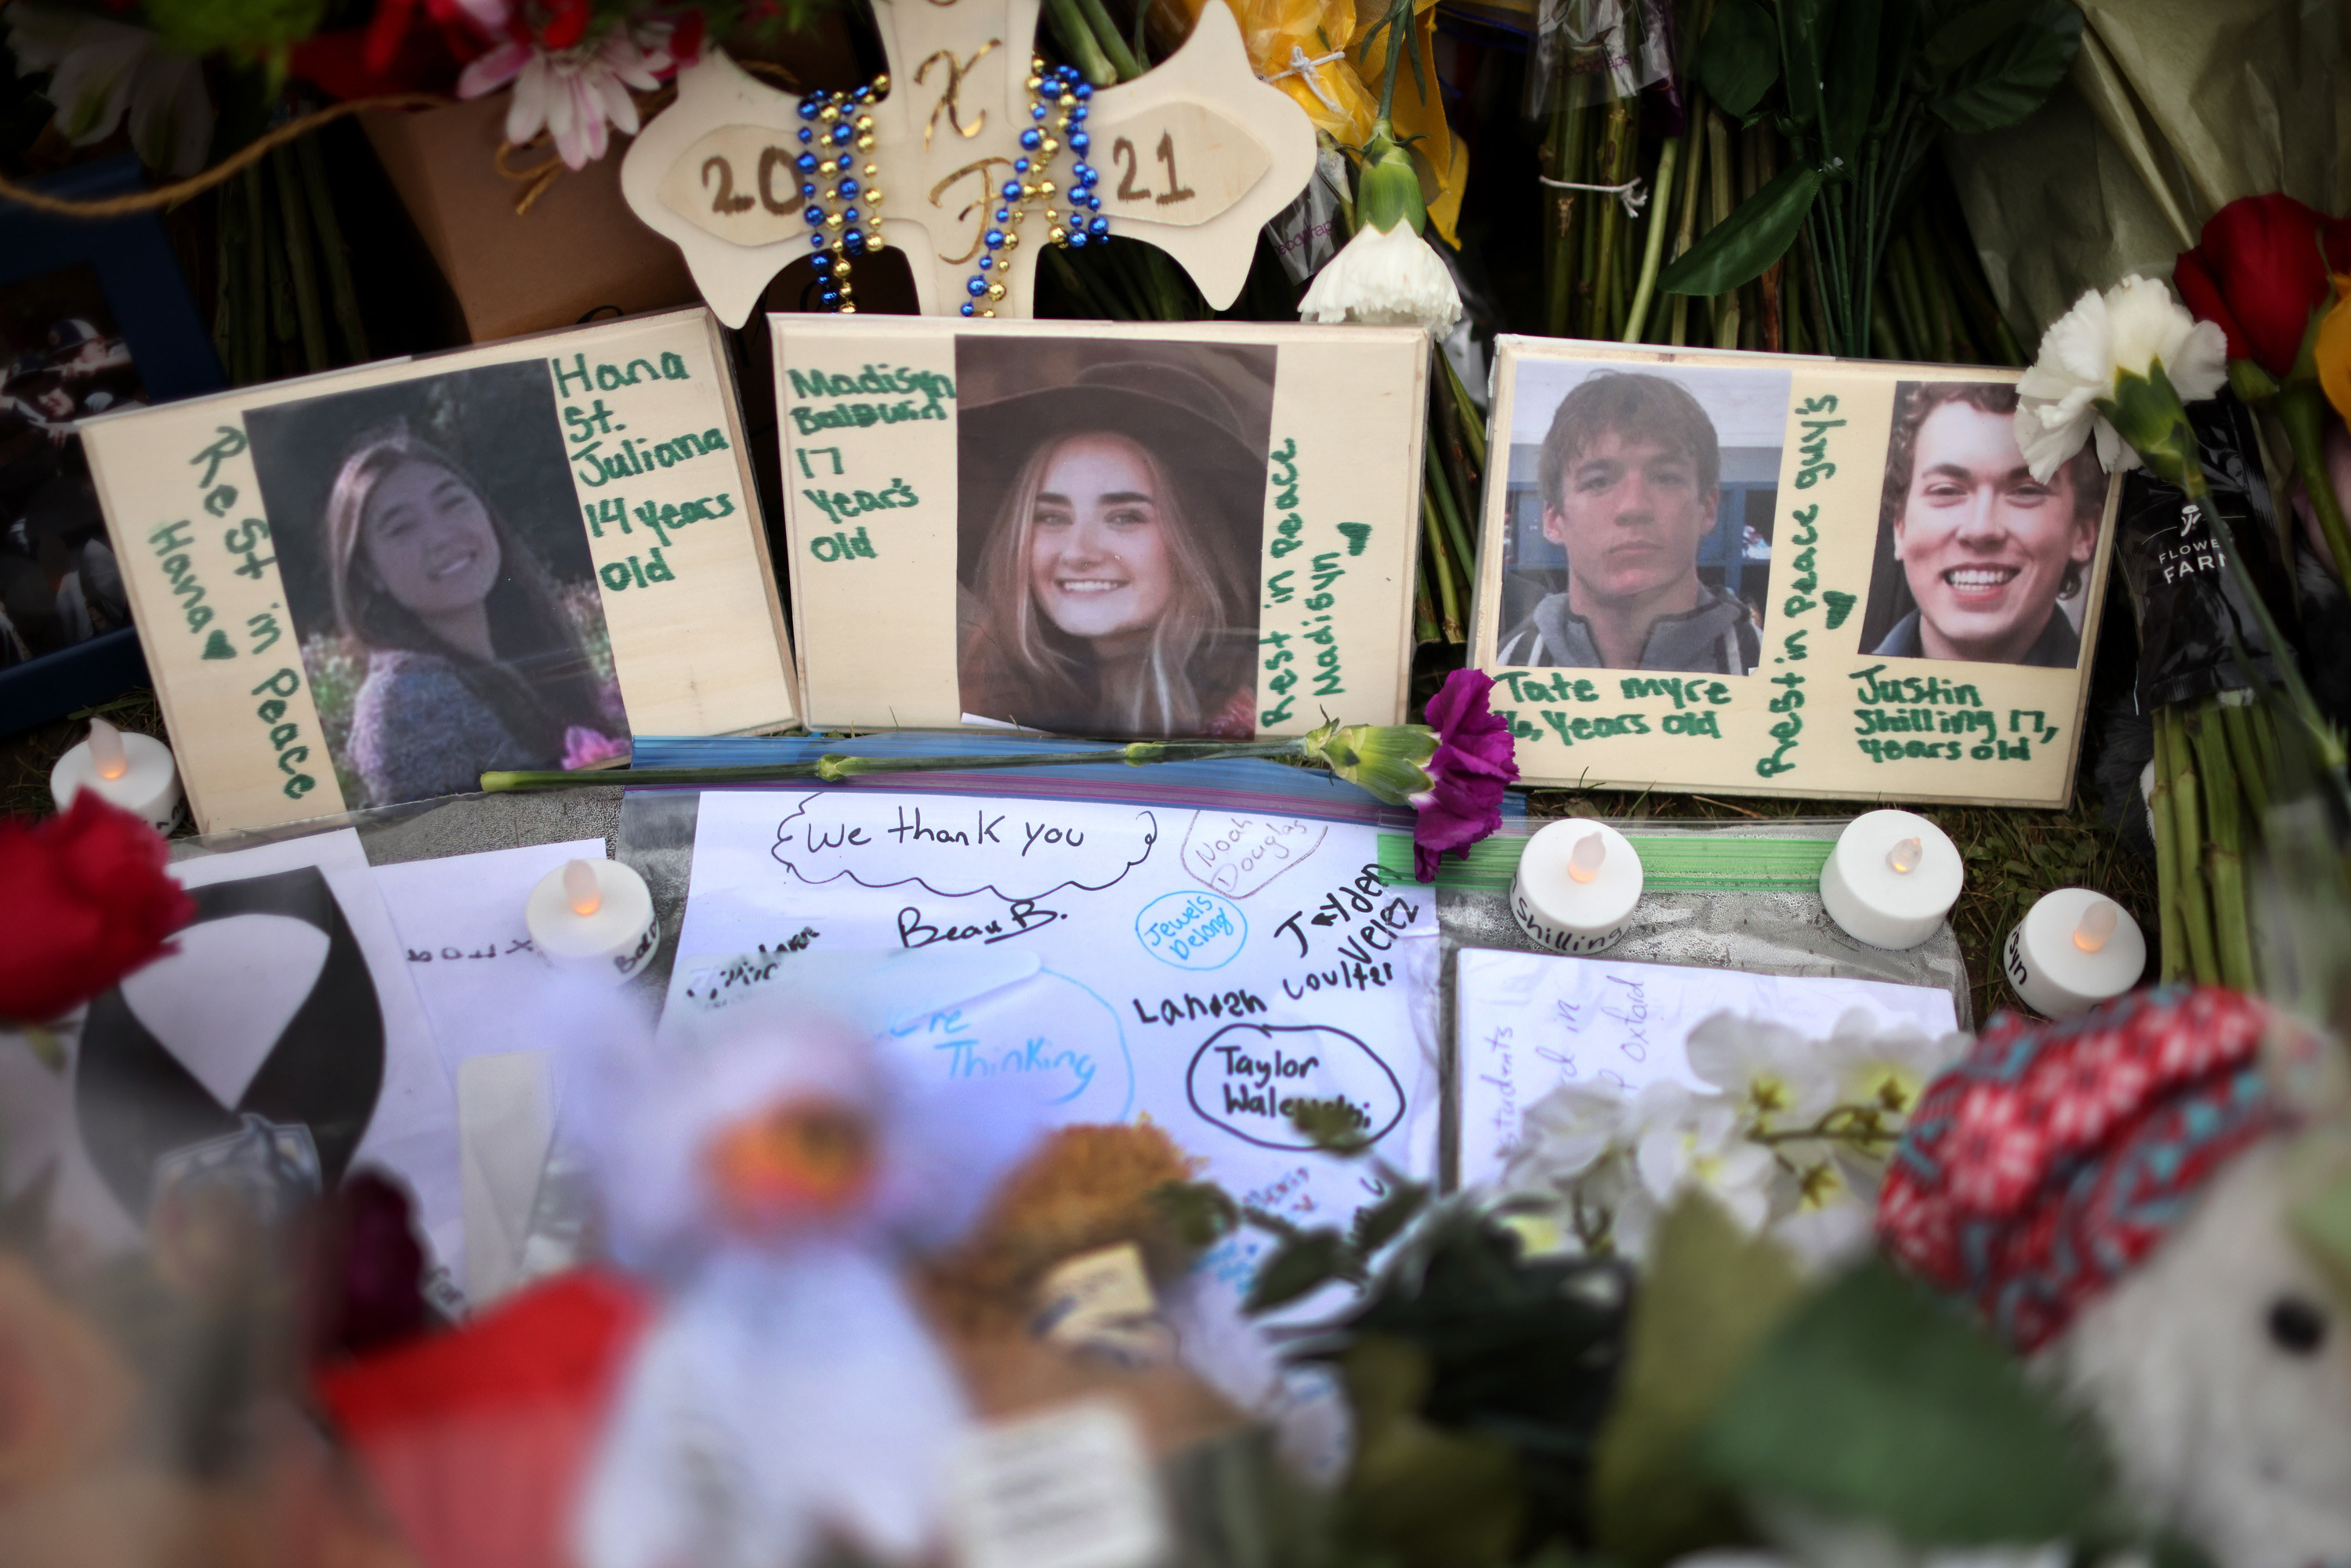 Memorial showing photos of the four students killed in the shooting alongside handwritten notes and lights